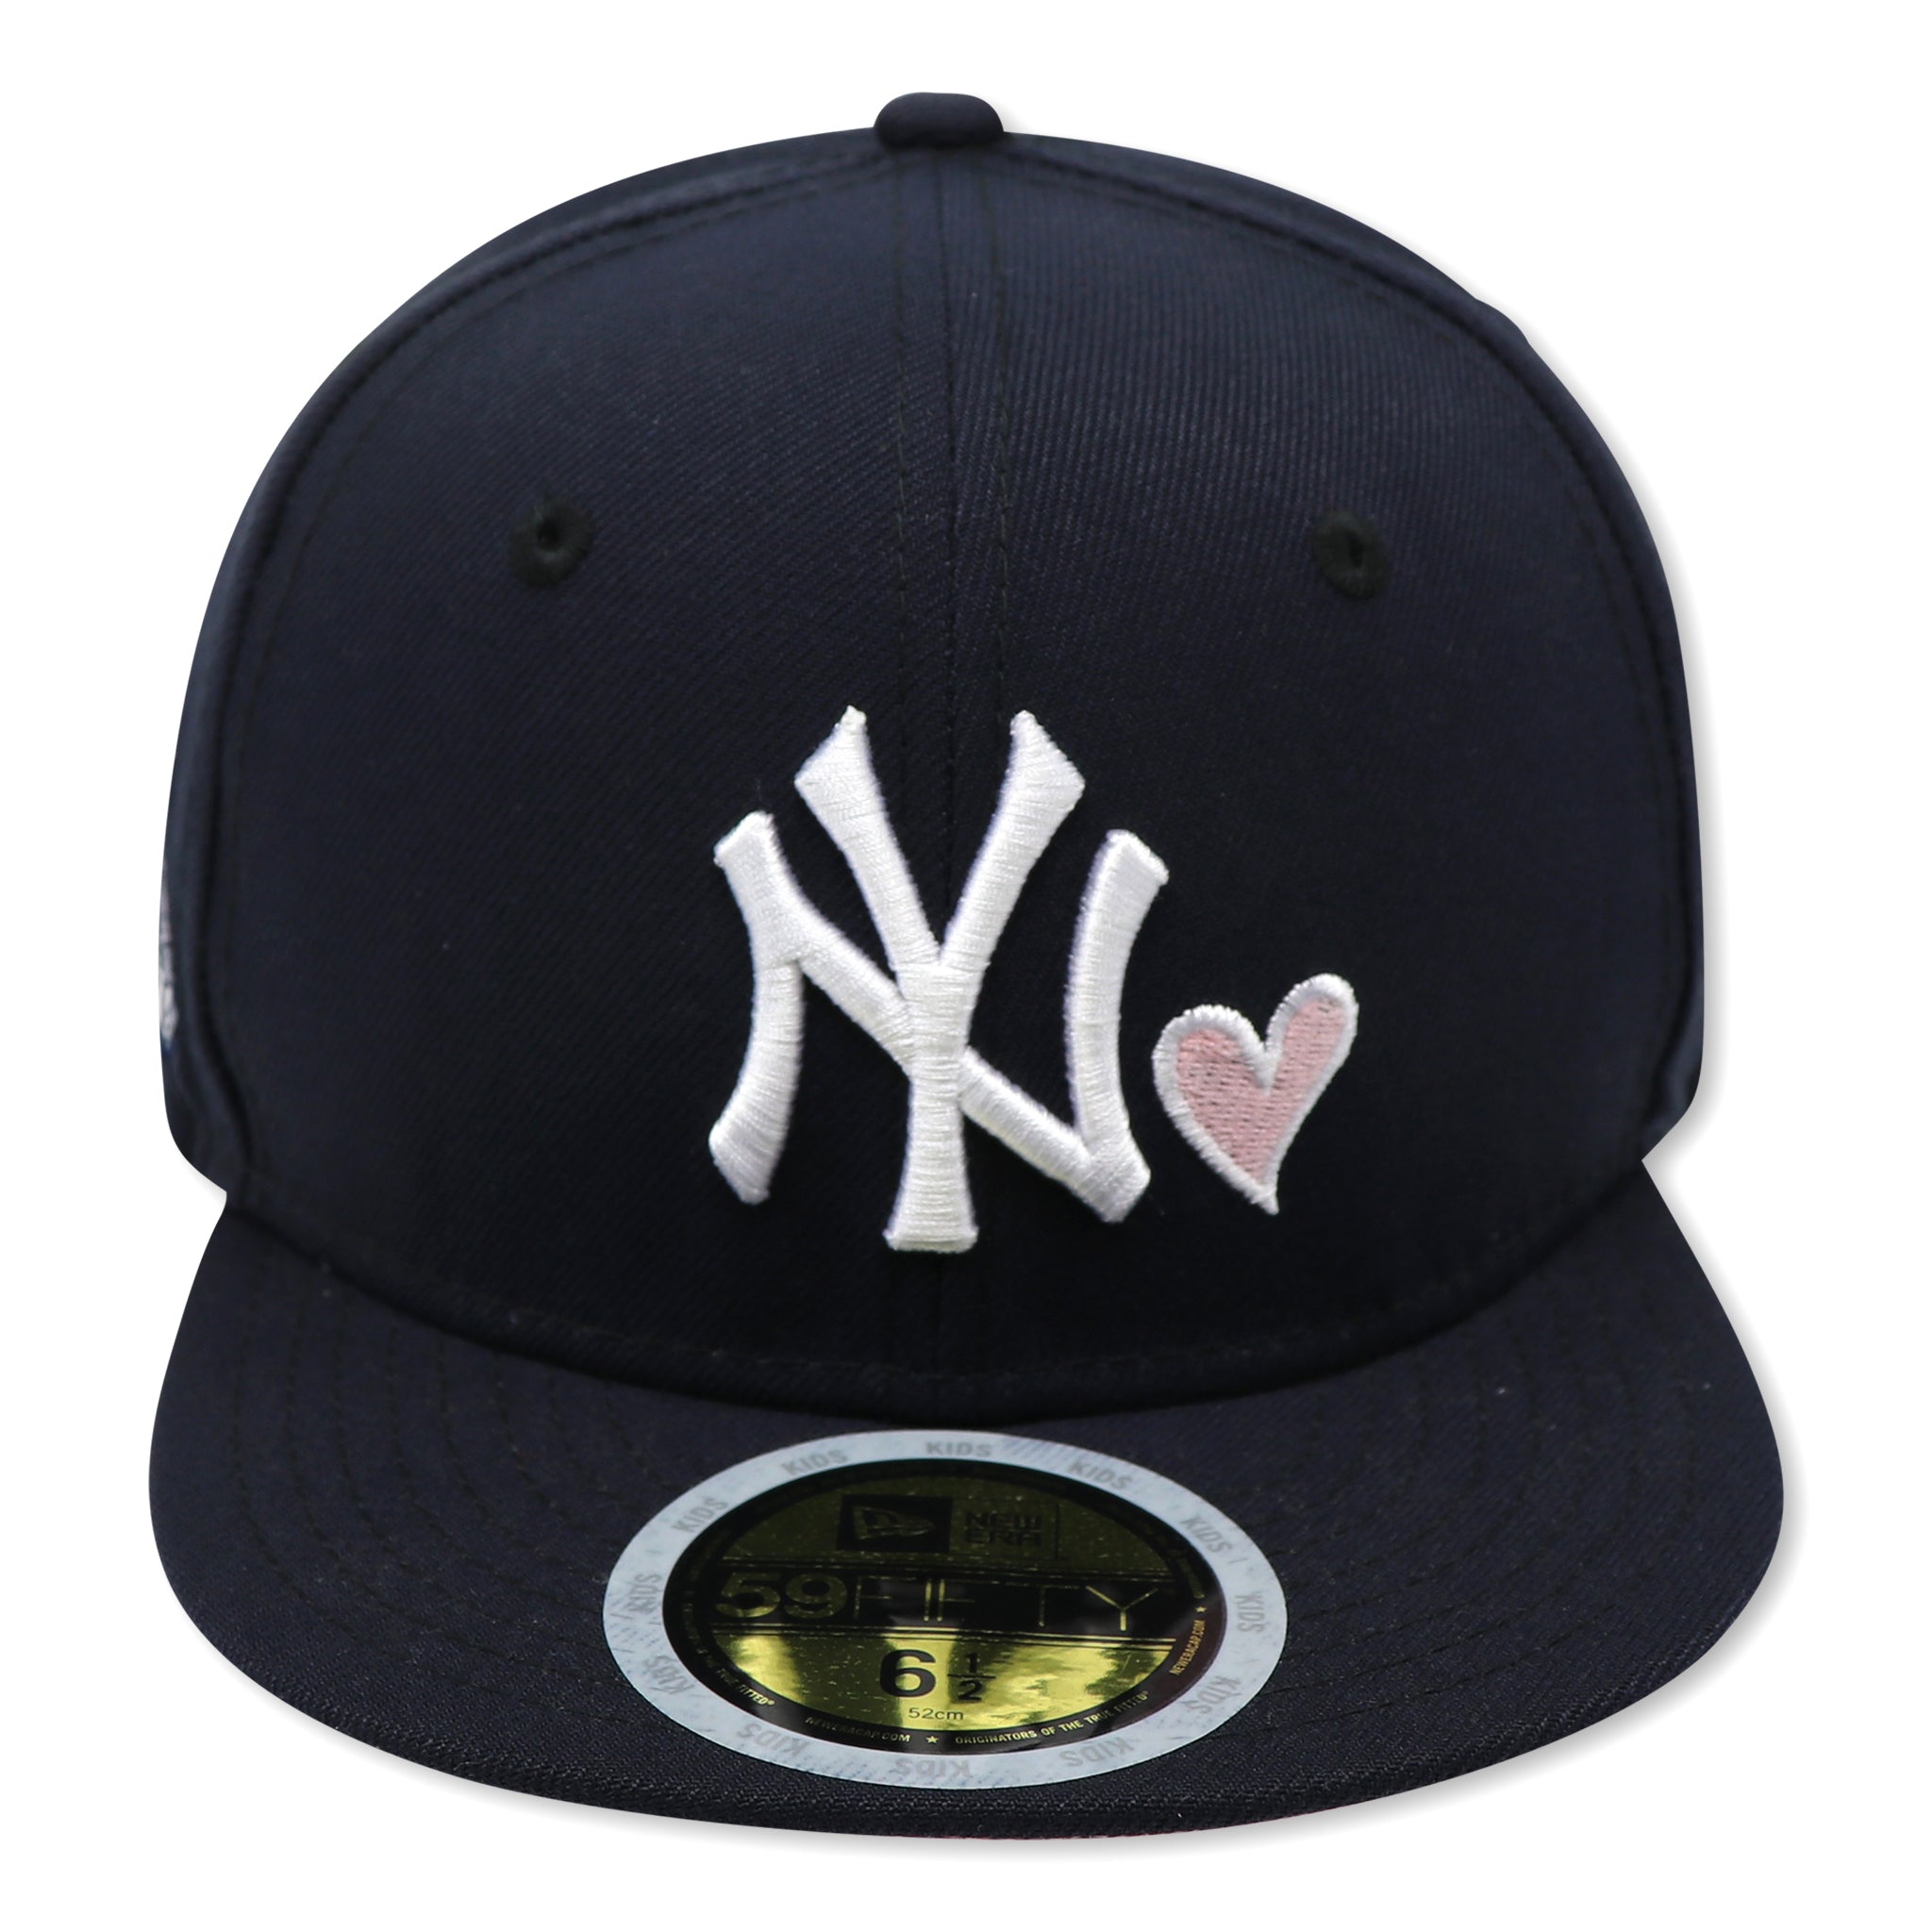 (KIDS) - NEW YORK YANKEES (2008 ASG X LOVE OF THE GAME) NEW ERA 59FIFTY FITTED (PINK UNDER VISOR)